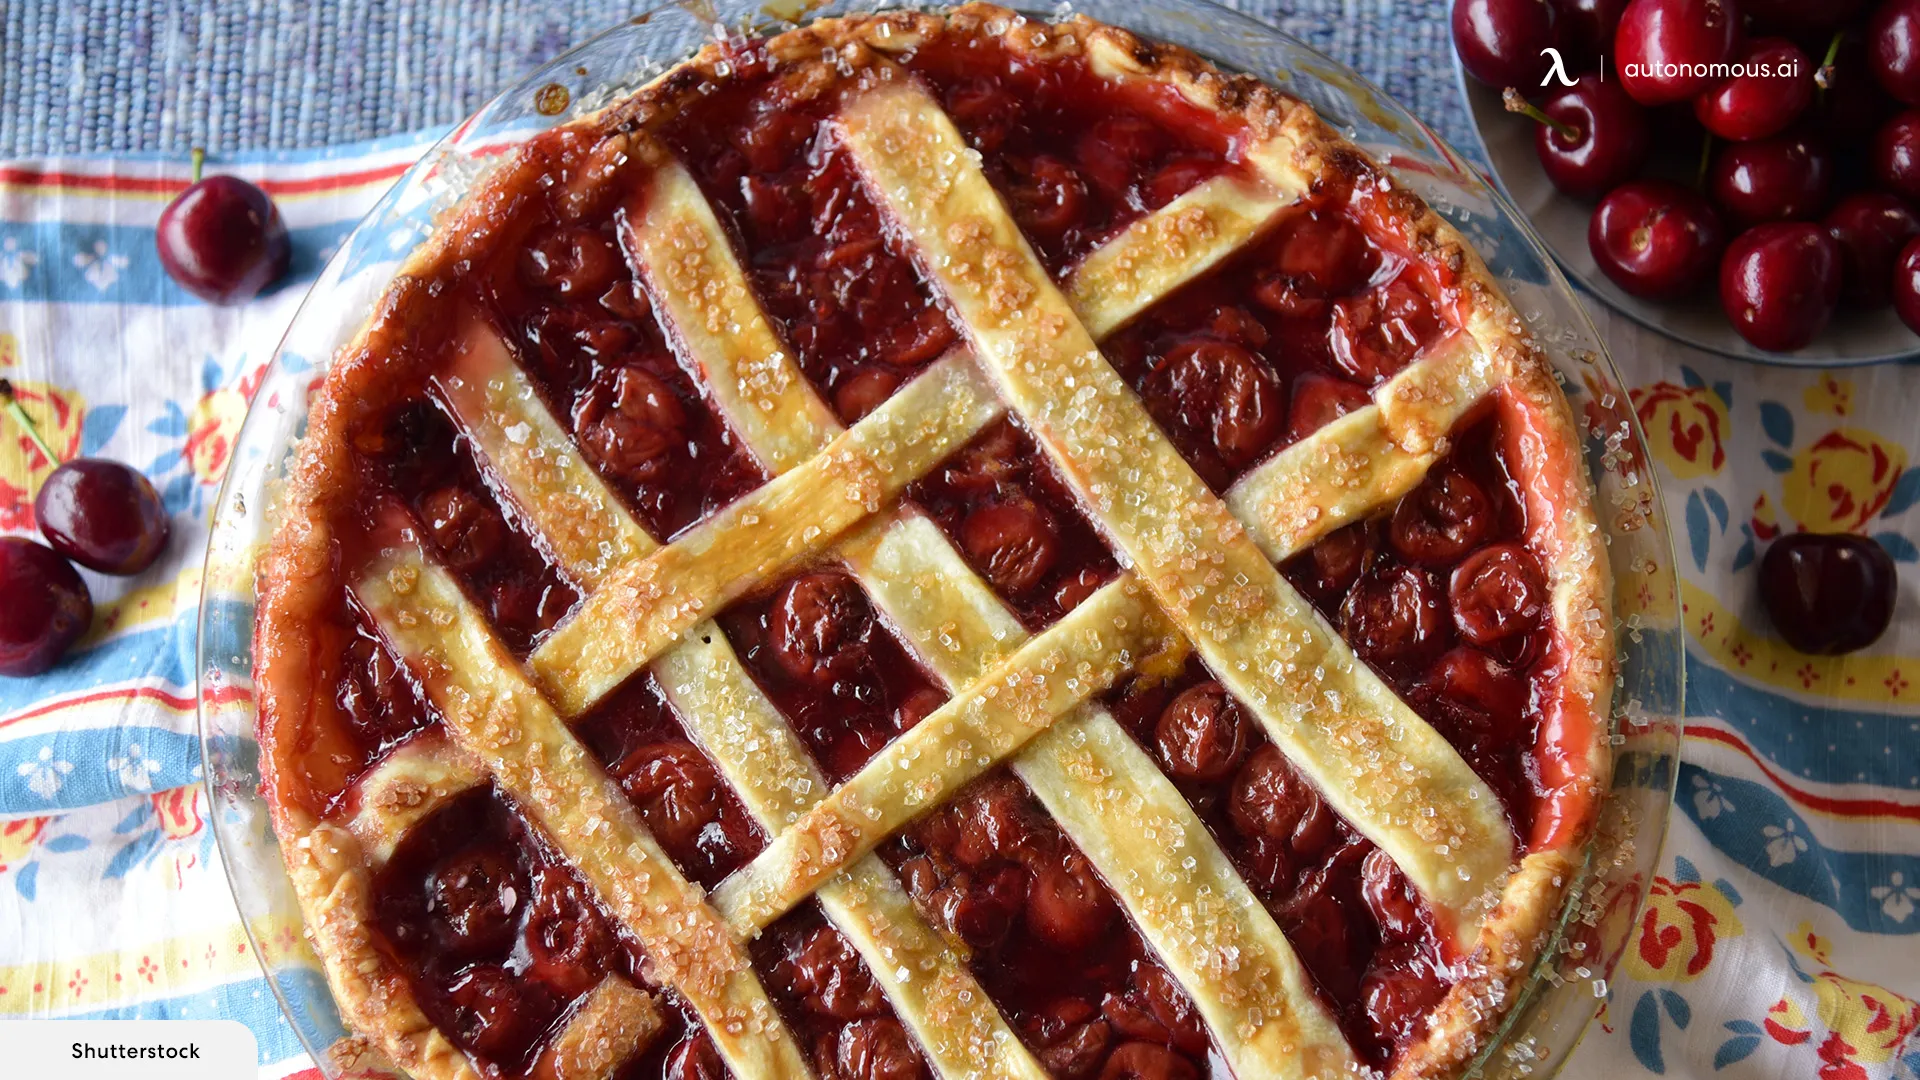 Cherry Pie Is the Food Associated With This Holiday